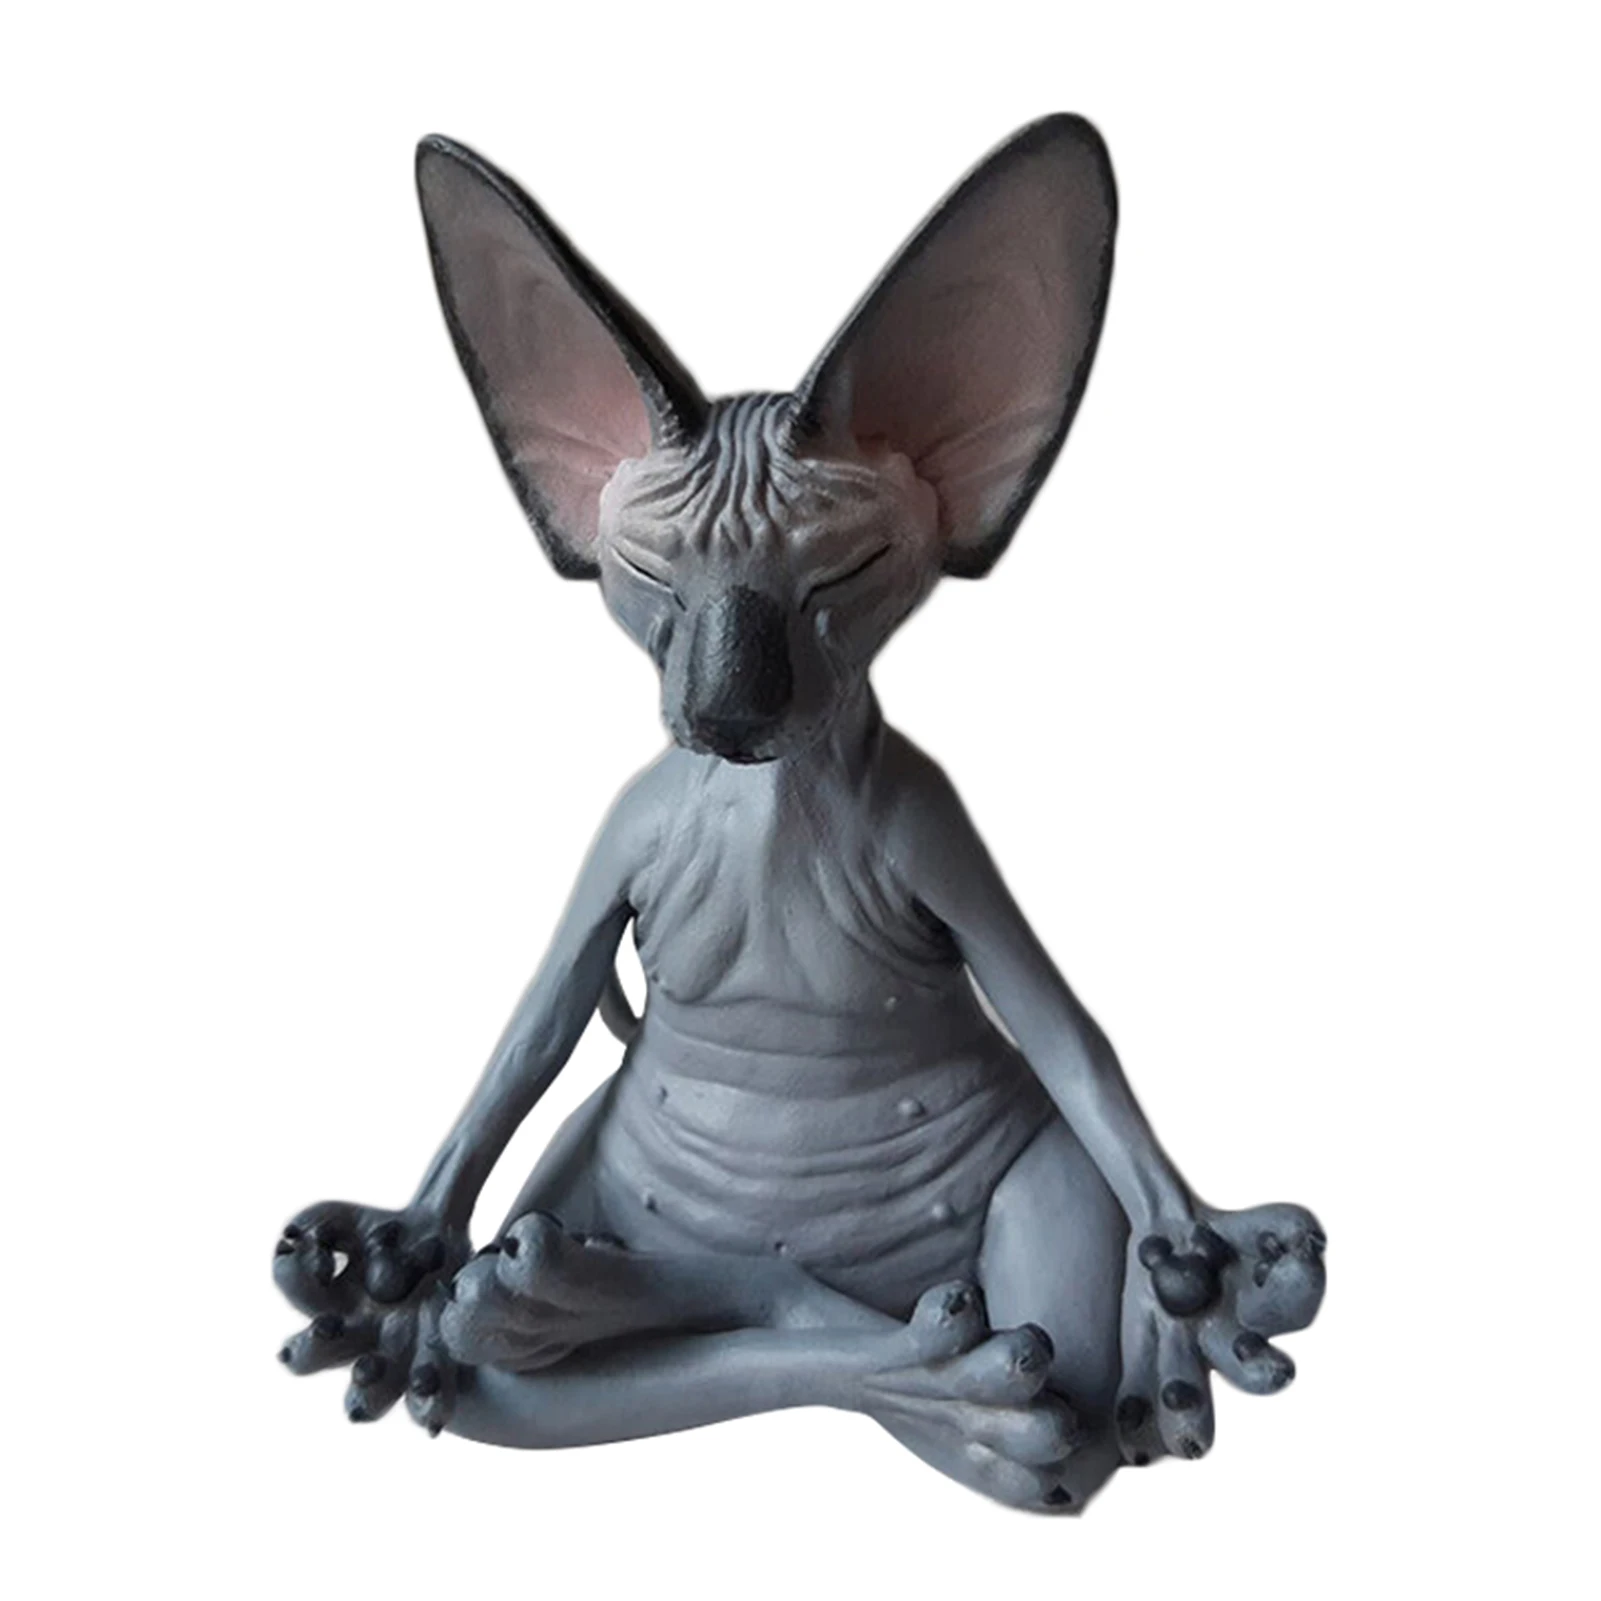 

2021 Sphynx Cat Meditate Statue Cute Hairless Cat Yoga Sitting Collectible Figure for Room Desk Decoration @LS